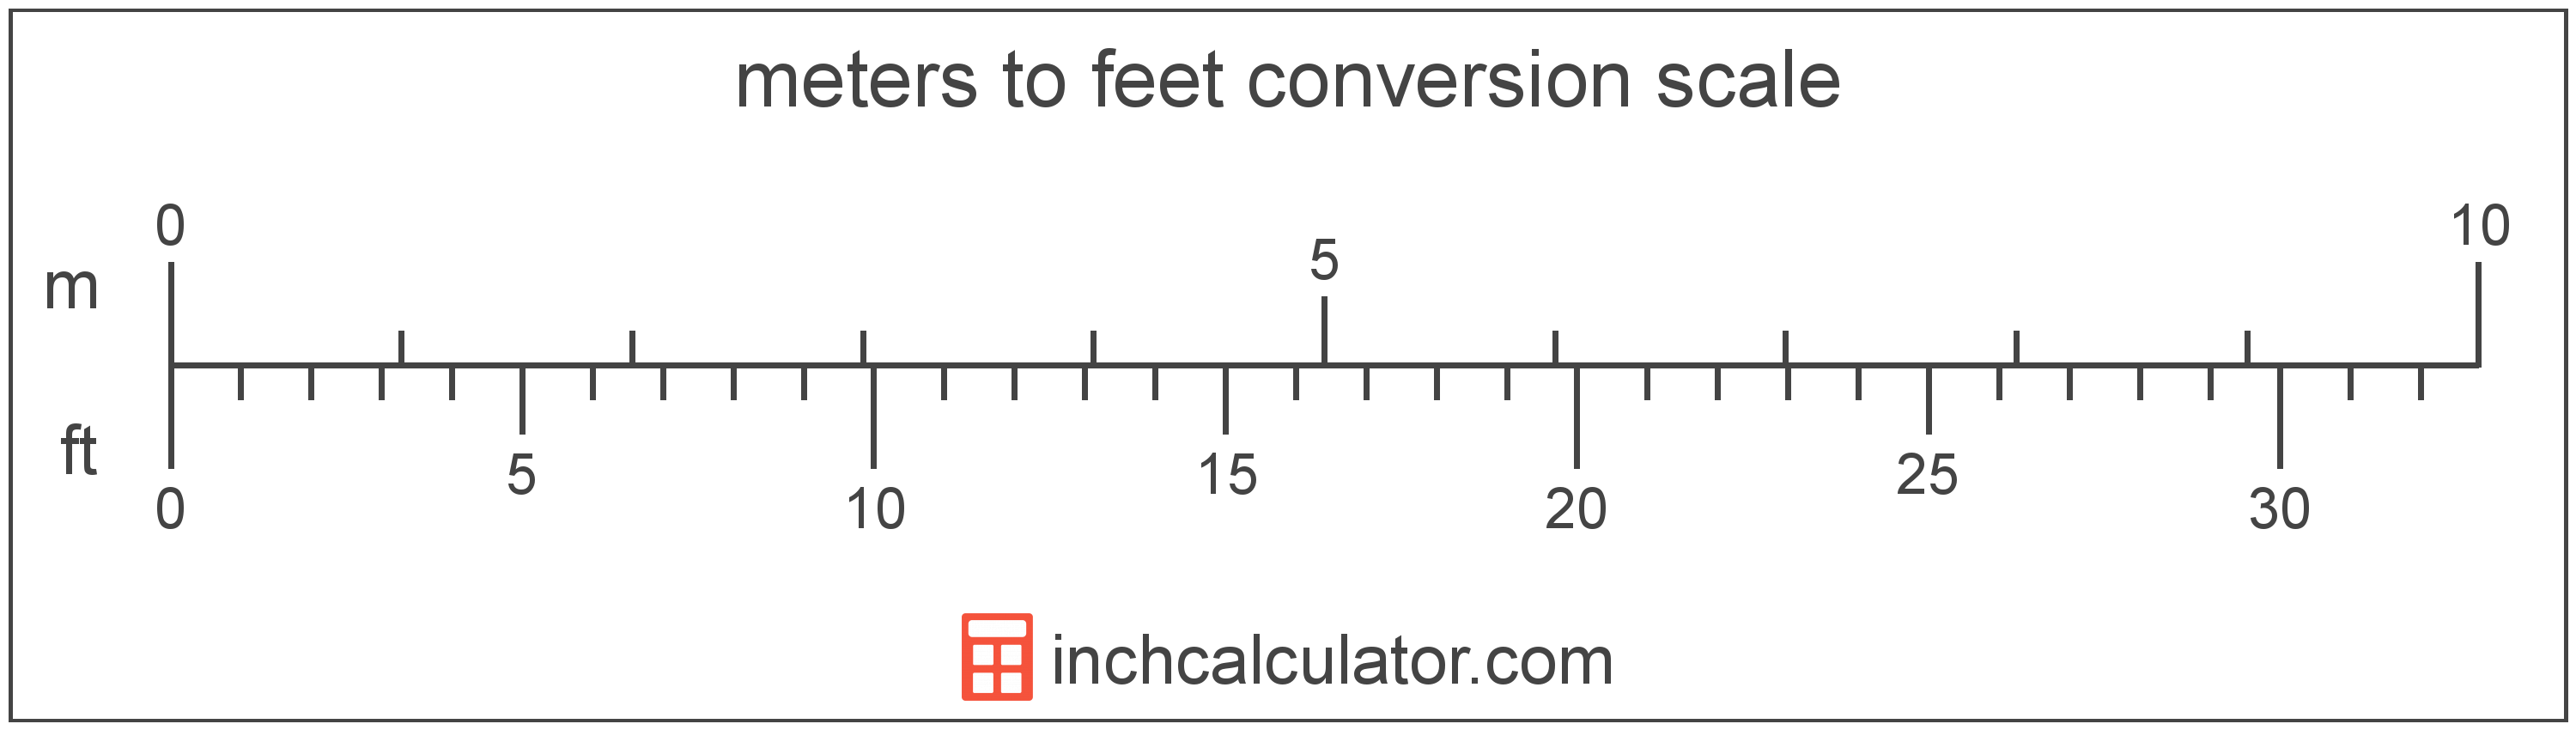 Meters To Feet Conversion Chart Printable